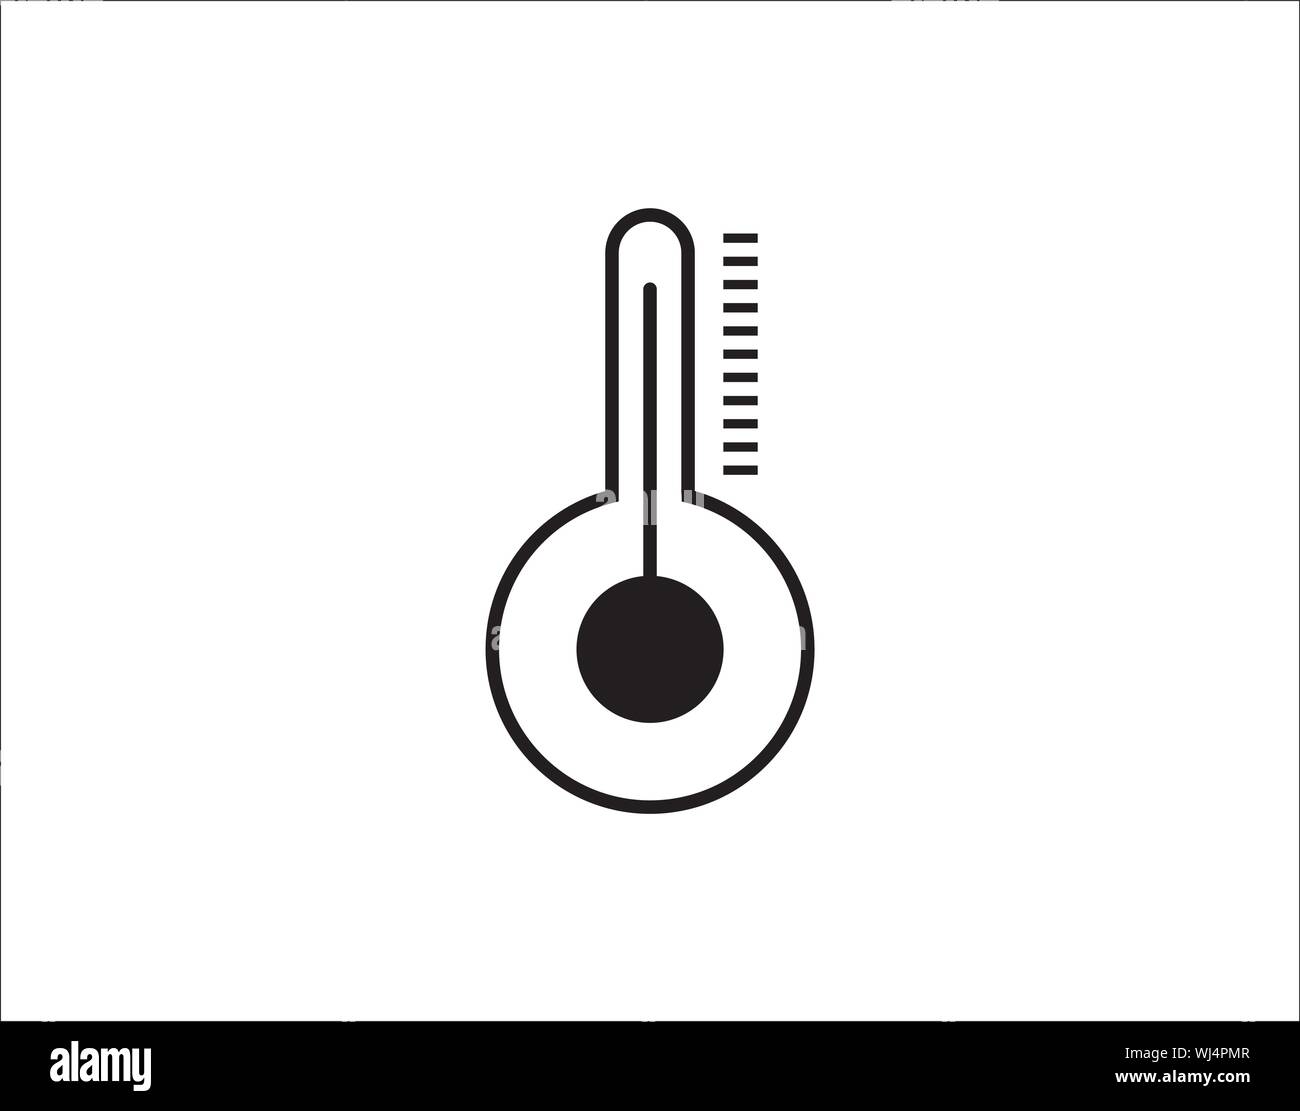 Thermometer icon vector, illustration logo template in trendy style. Can be used for many purposes. Stock Vector